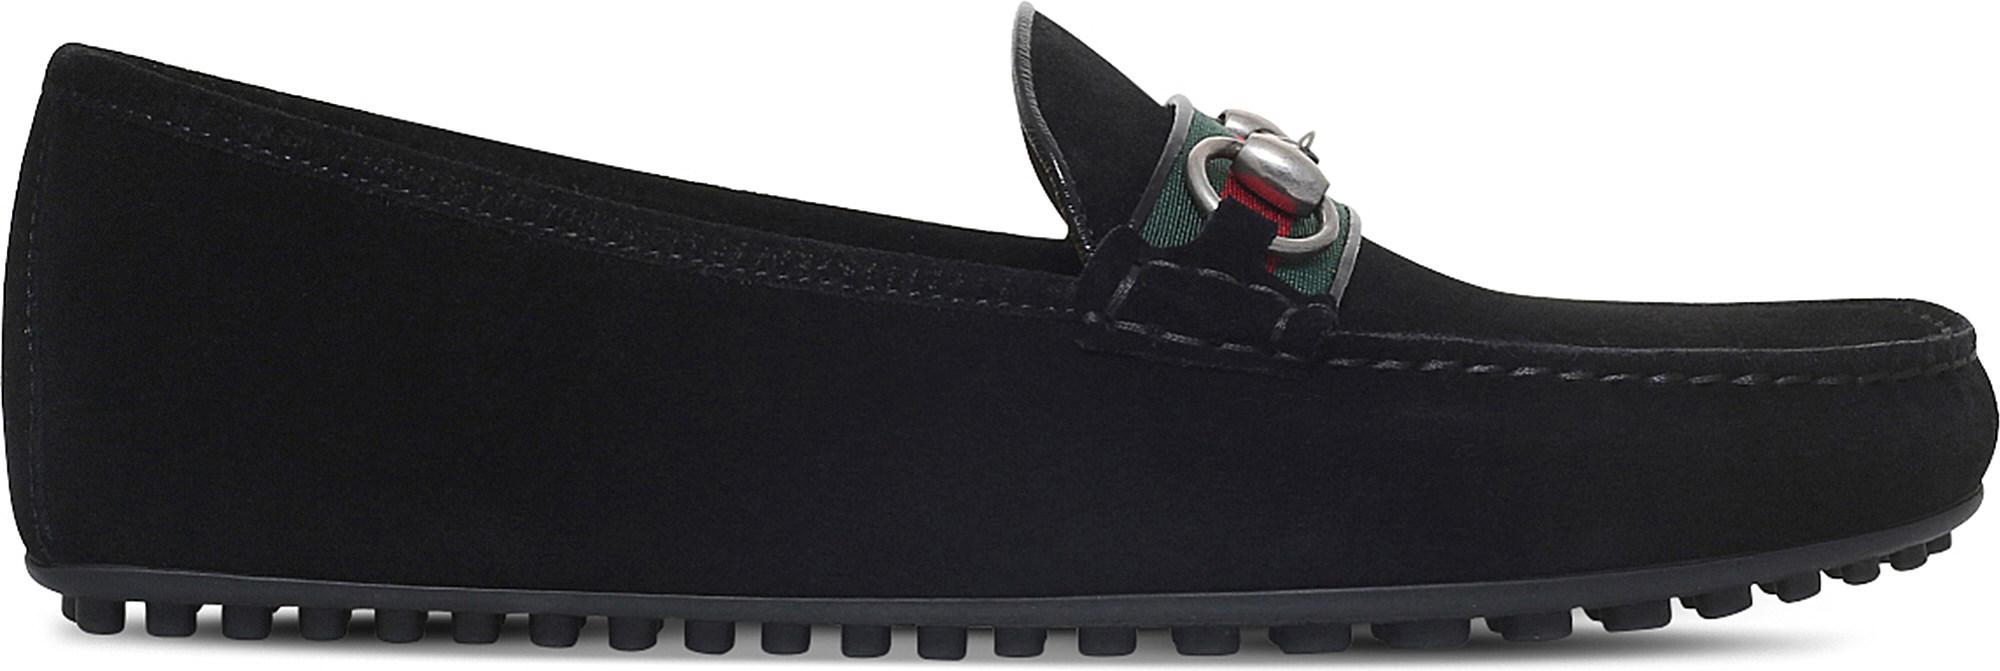 gucci kanye leather driving shoes